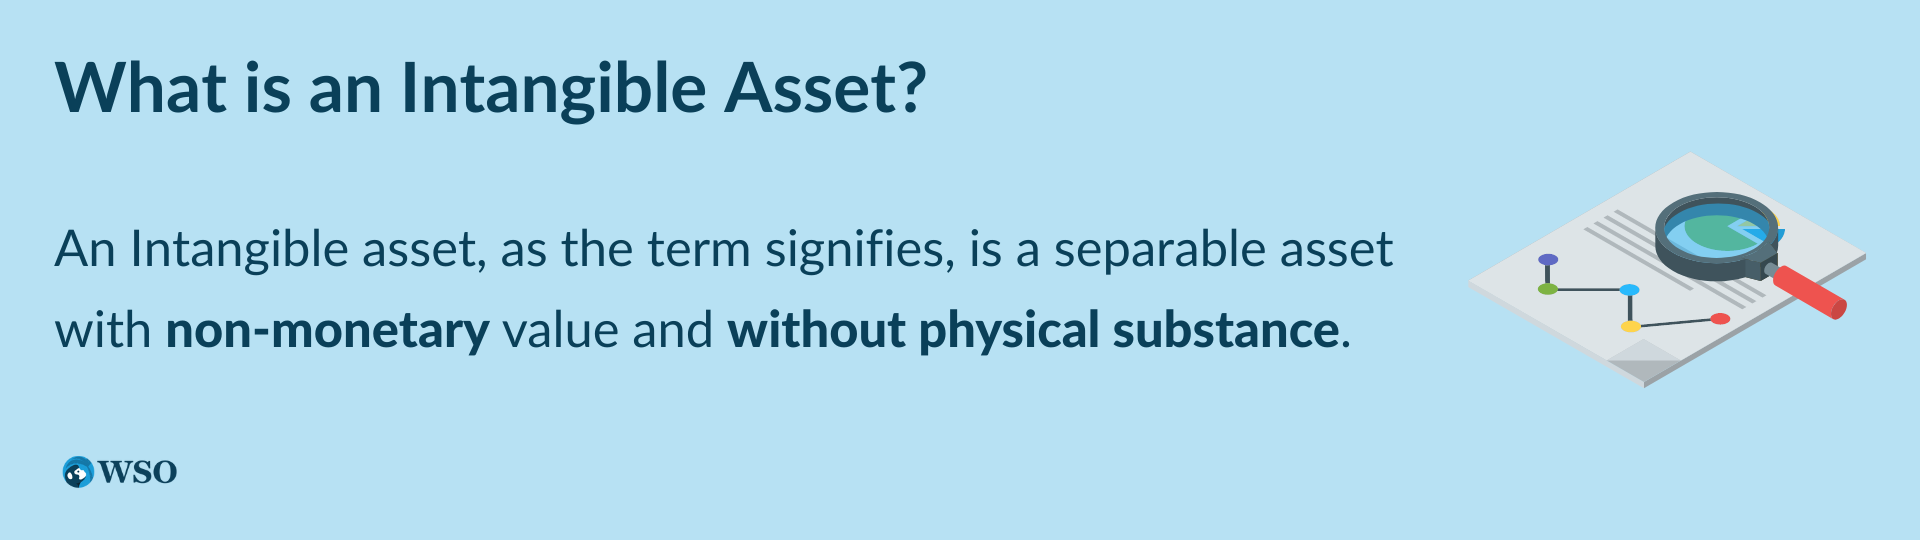 What is an Intangible Asset?